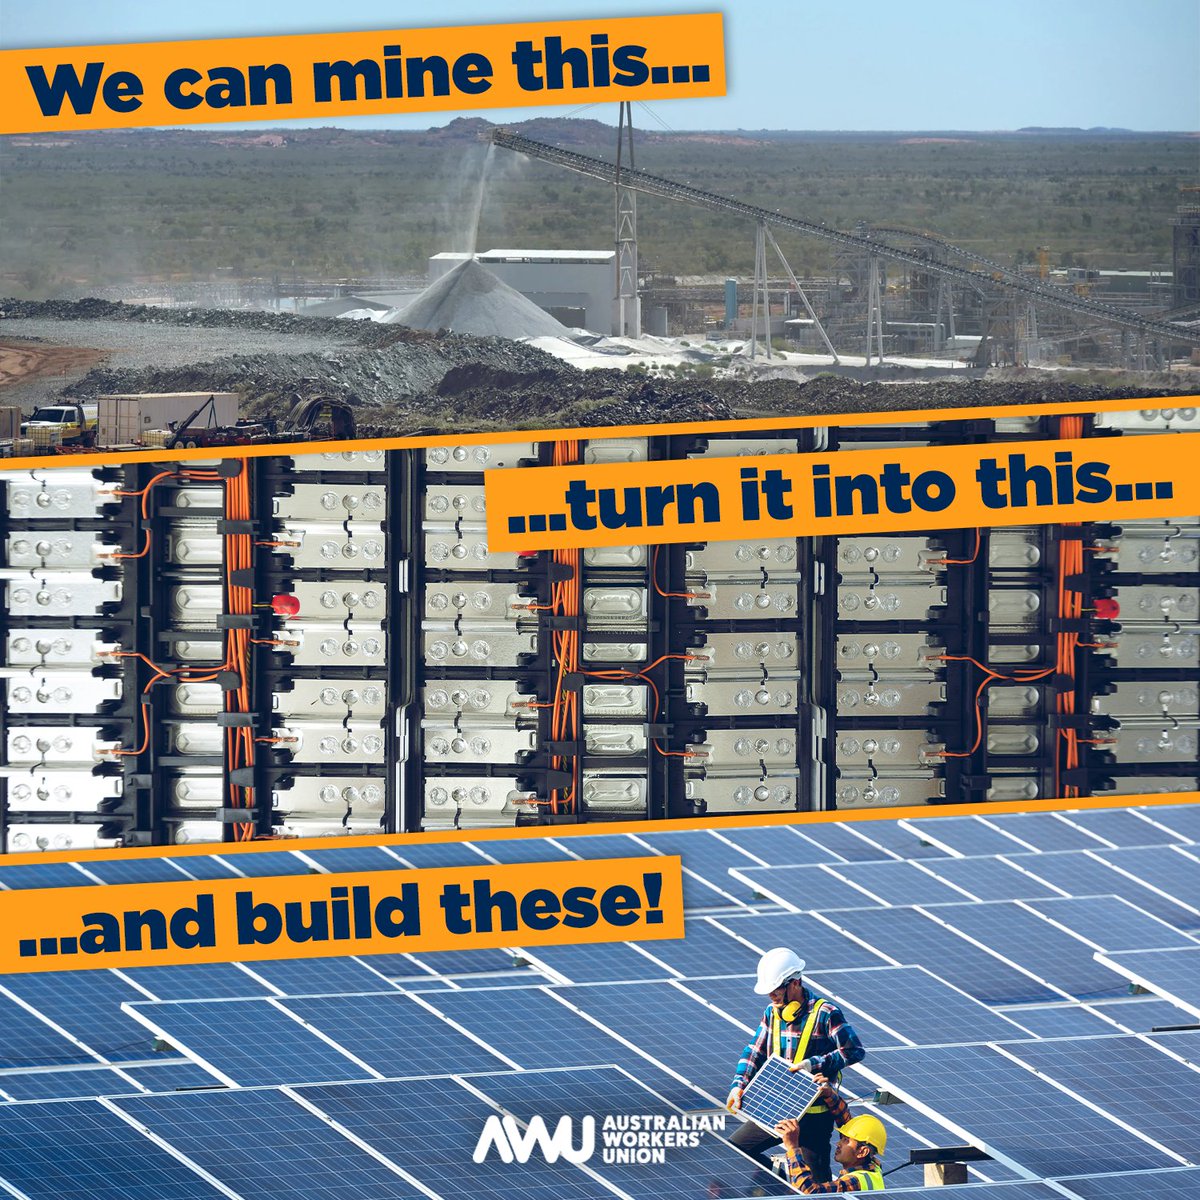 Australia has the inside lane to emerge as a clean manufacturing superpower. Our massive mineral wealth, skilled workforce and abundant land and green energy resources can drive the next great wave of national prosperity.

#AWU #AWUnion #ausunions #auspol